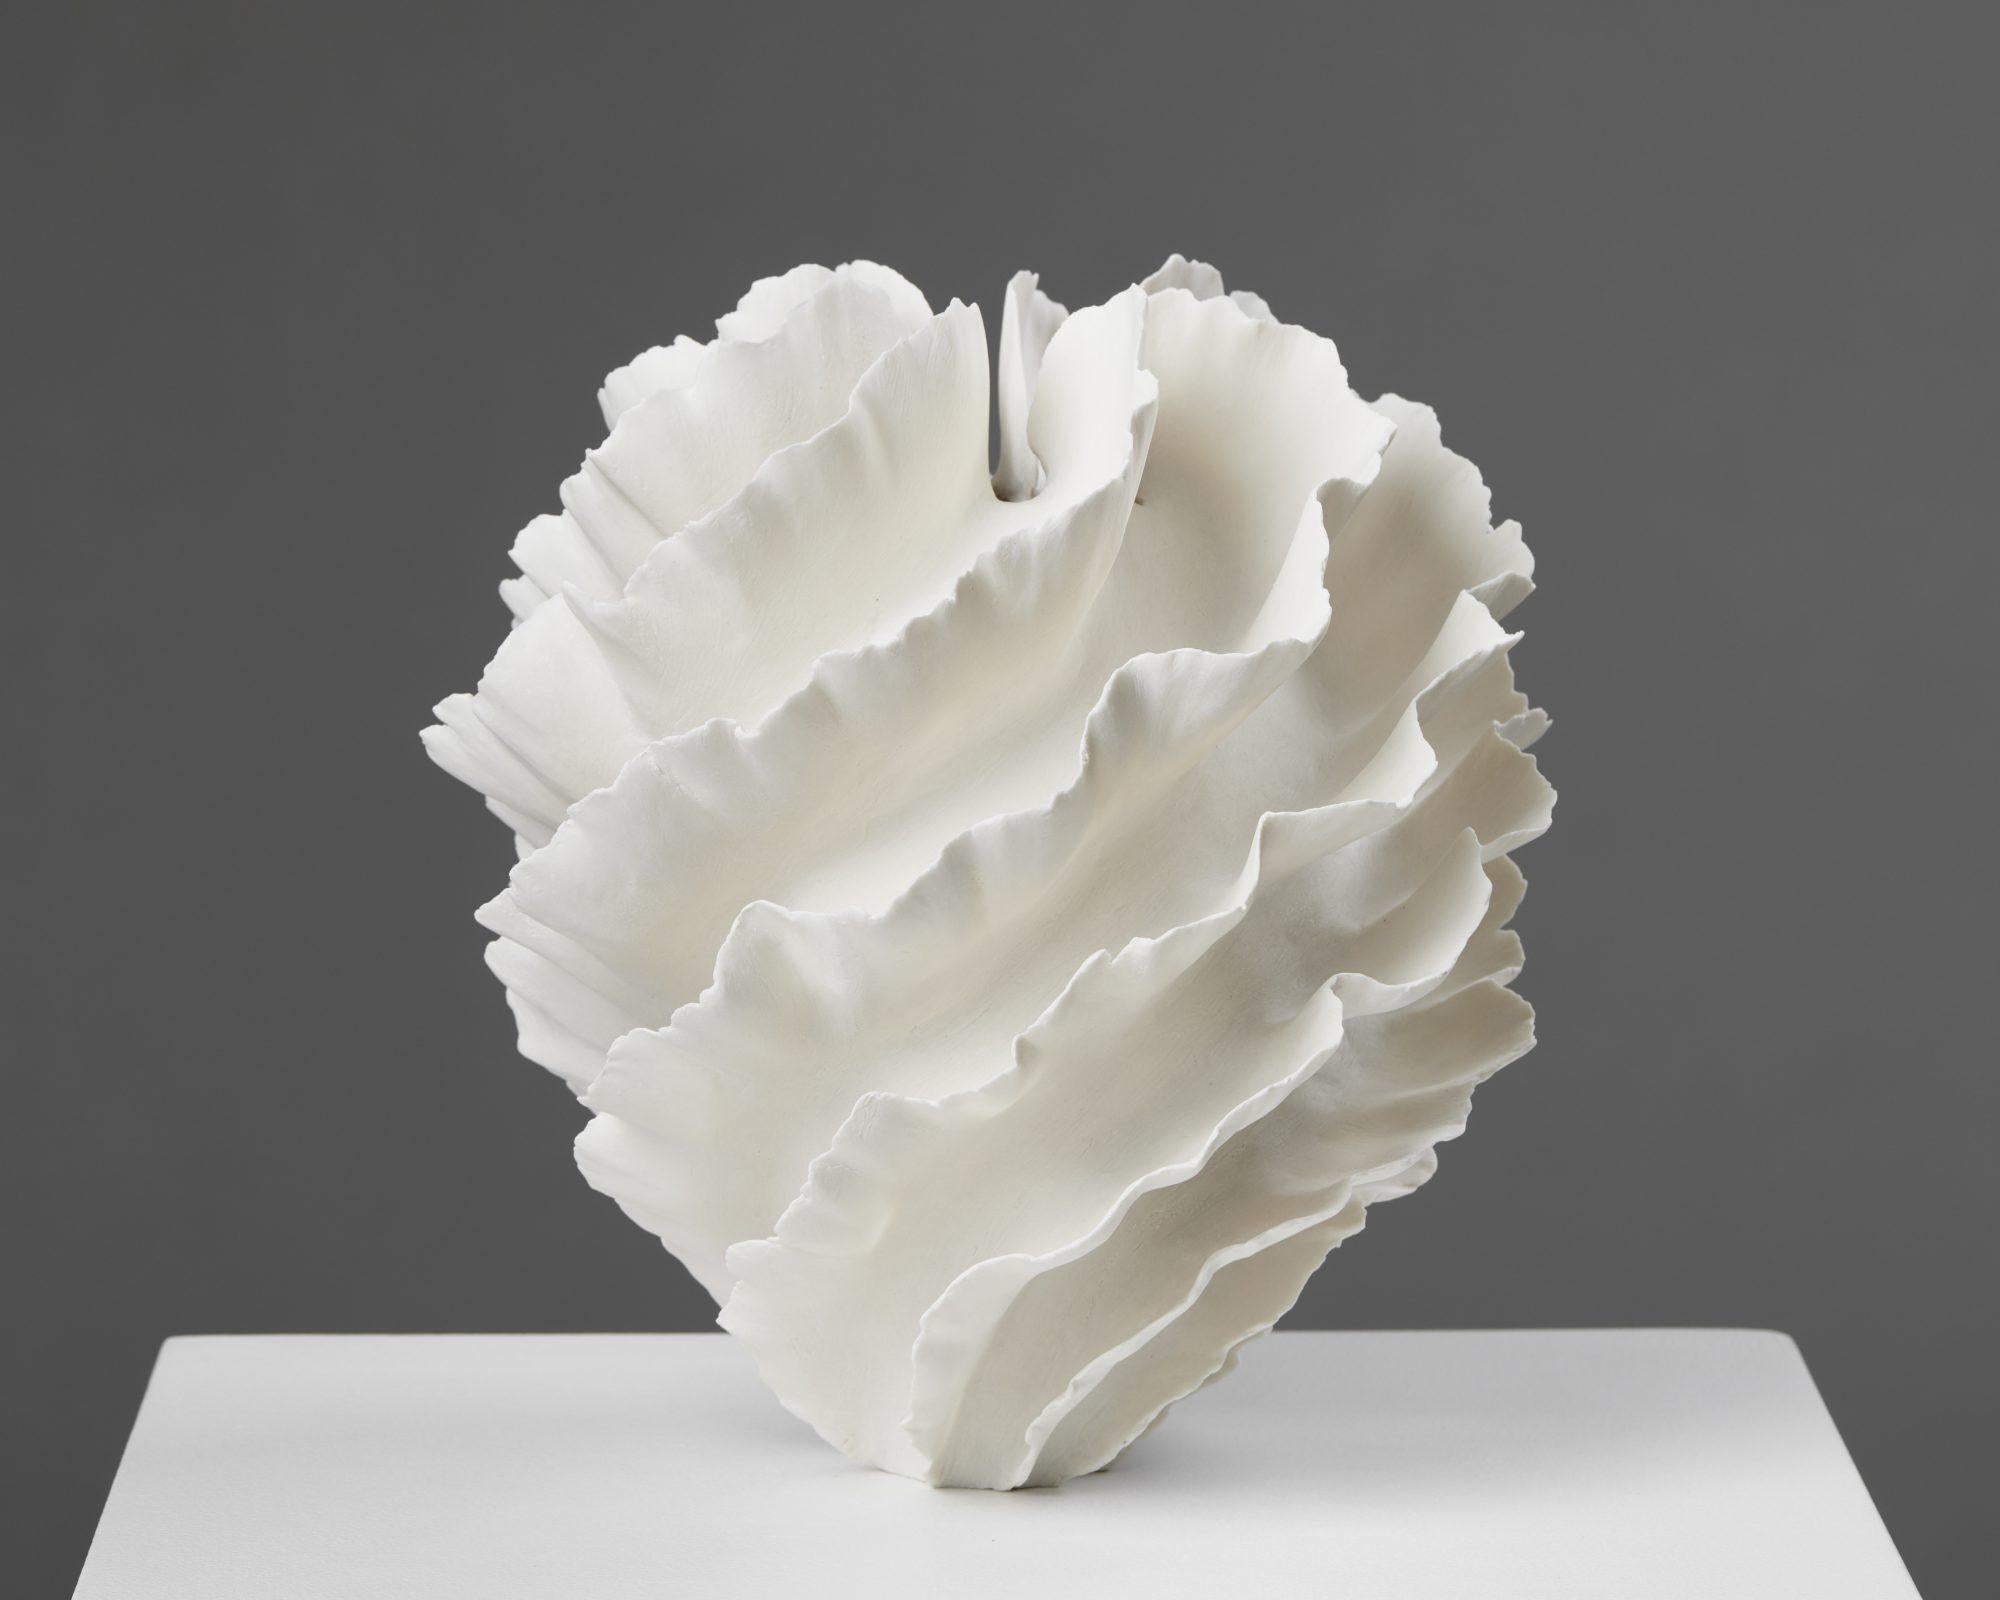 Vessel by Sandra Davolio,
Denmark, 2023.
Porcelain.

Unique.

Signed.

Sandra Davolio is an acclaimed contemporary Danish-Italian ceramic artist who has been represented by Modernity for more than ten years. Davolio takes her inspiration from nature